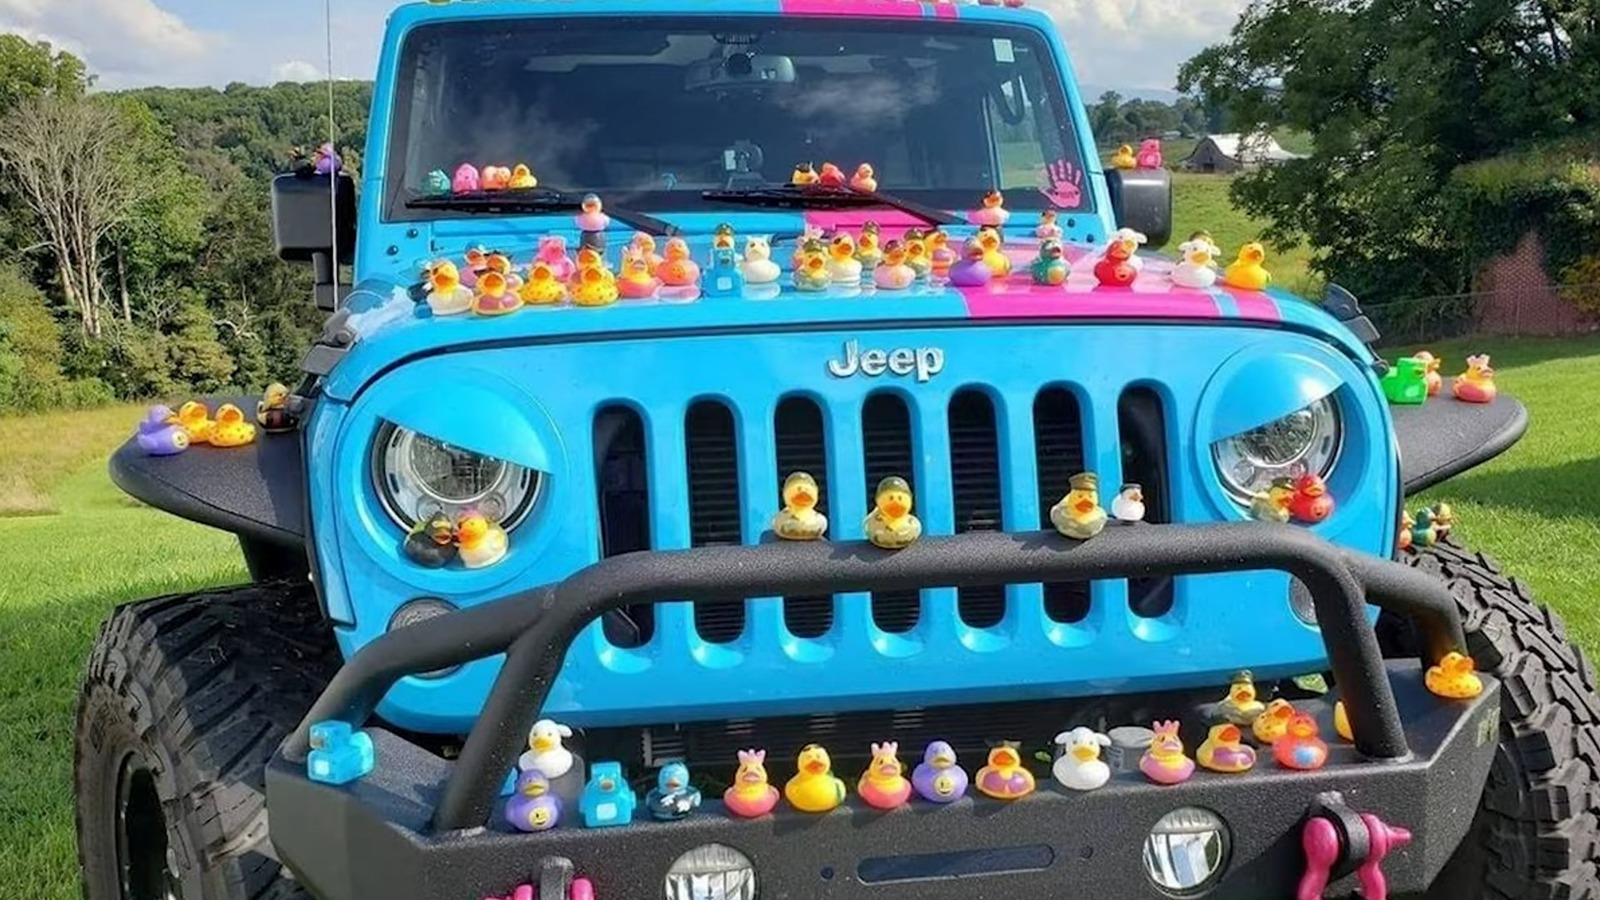 3 Of The Best Ducks For Jeep 'Ducking'